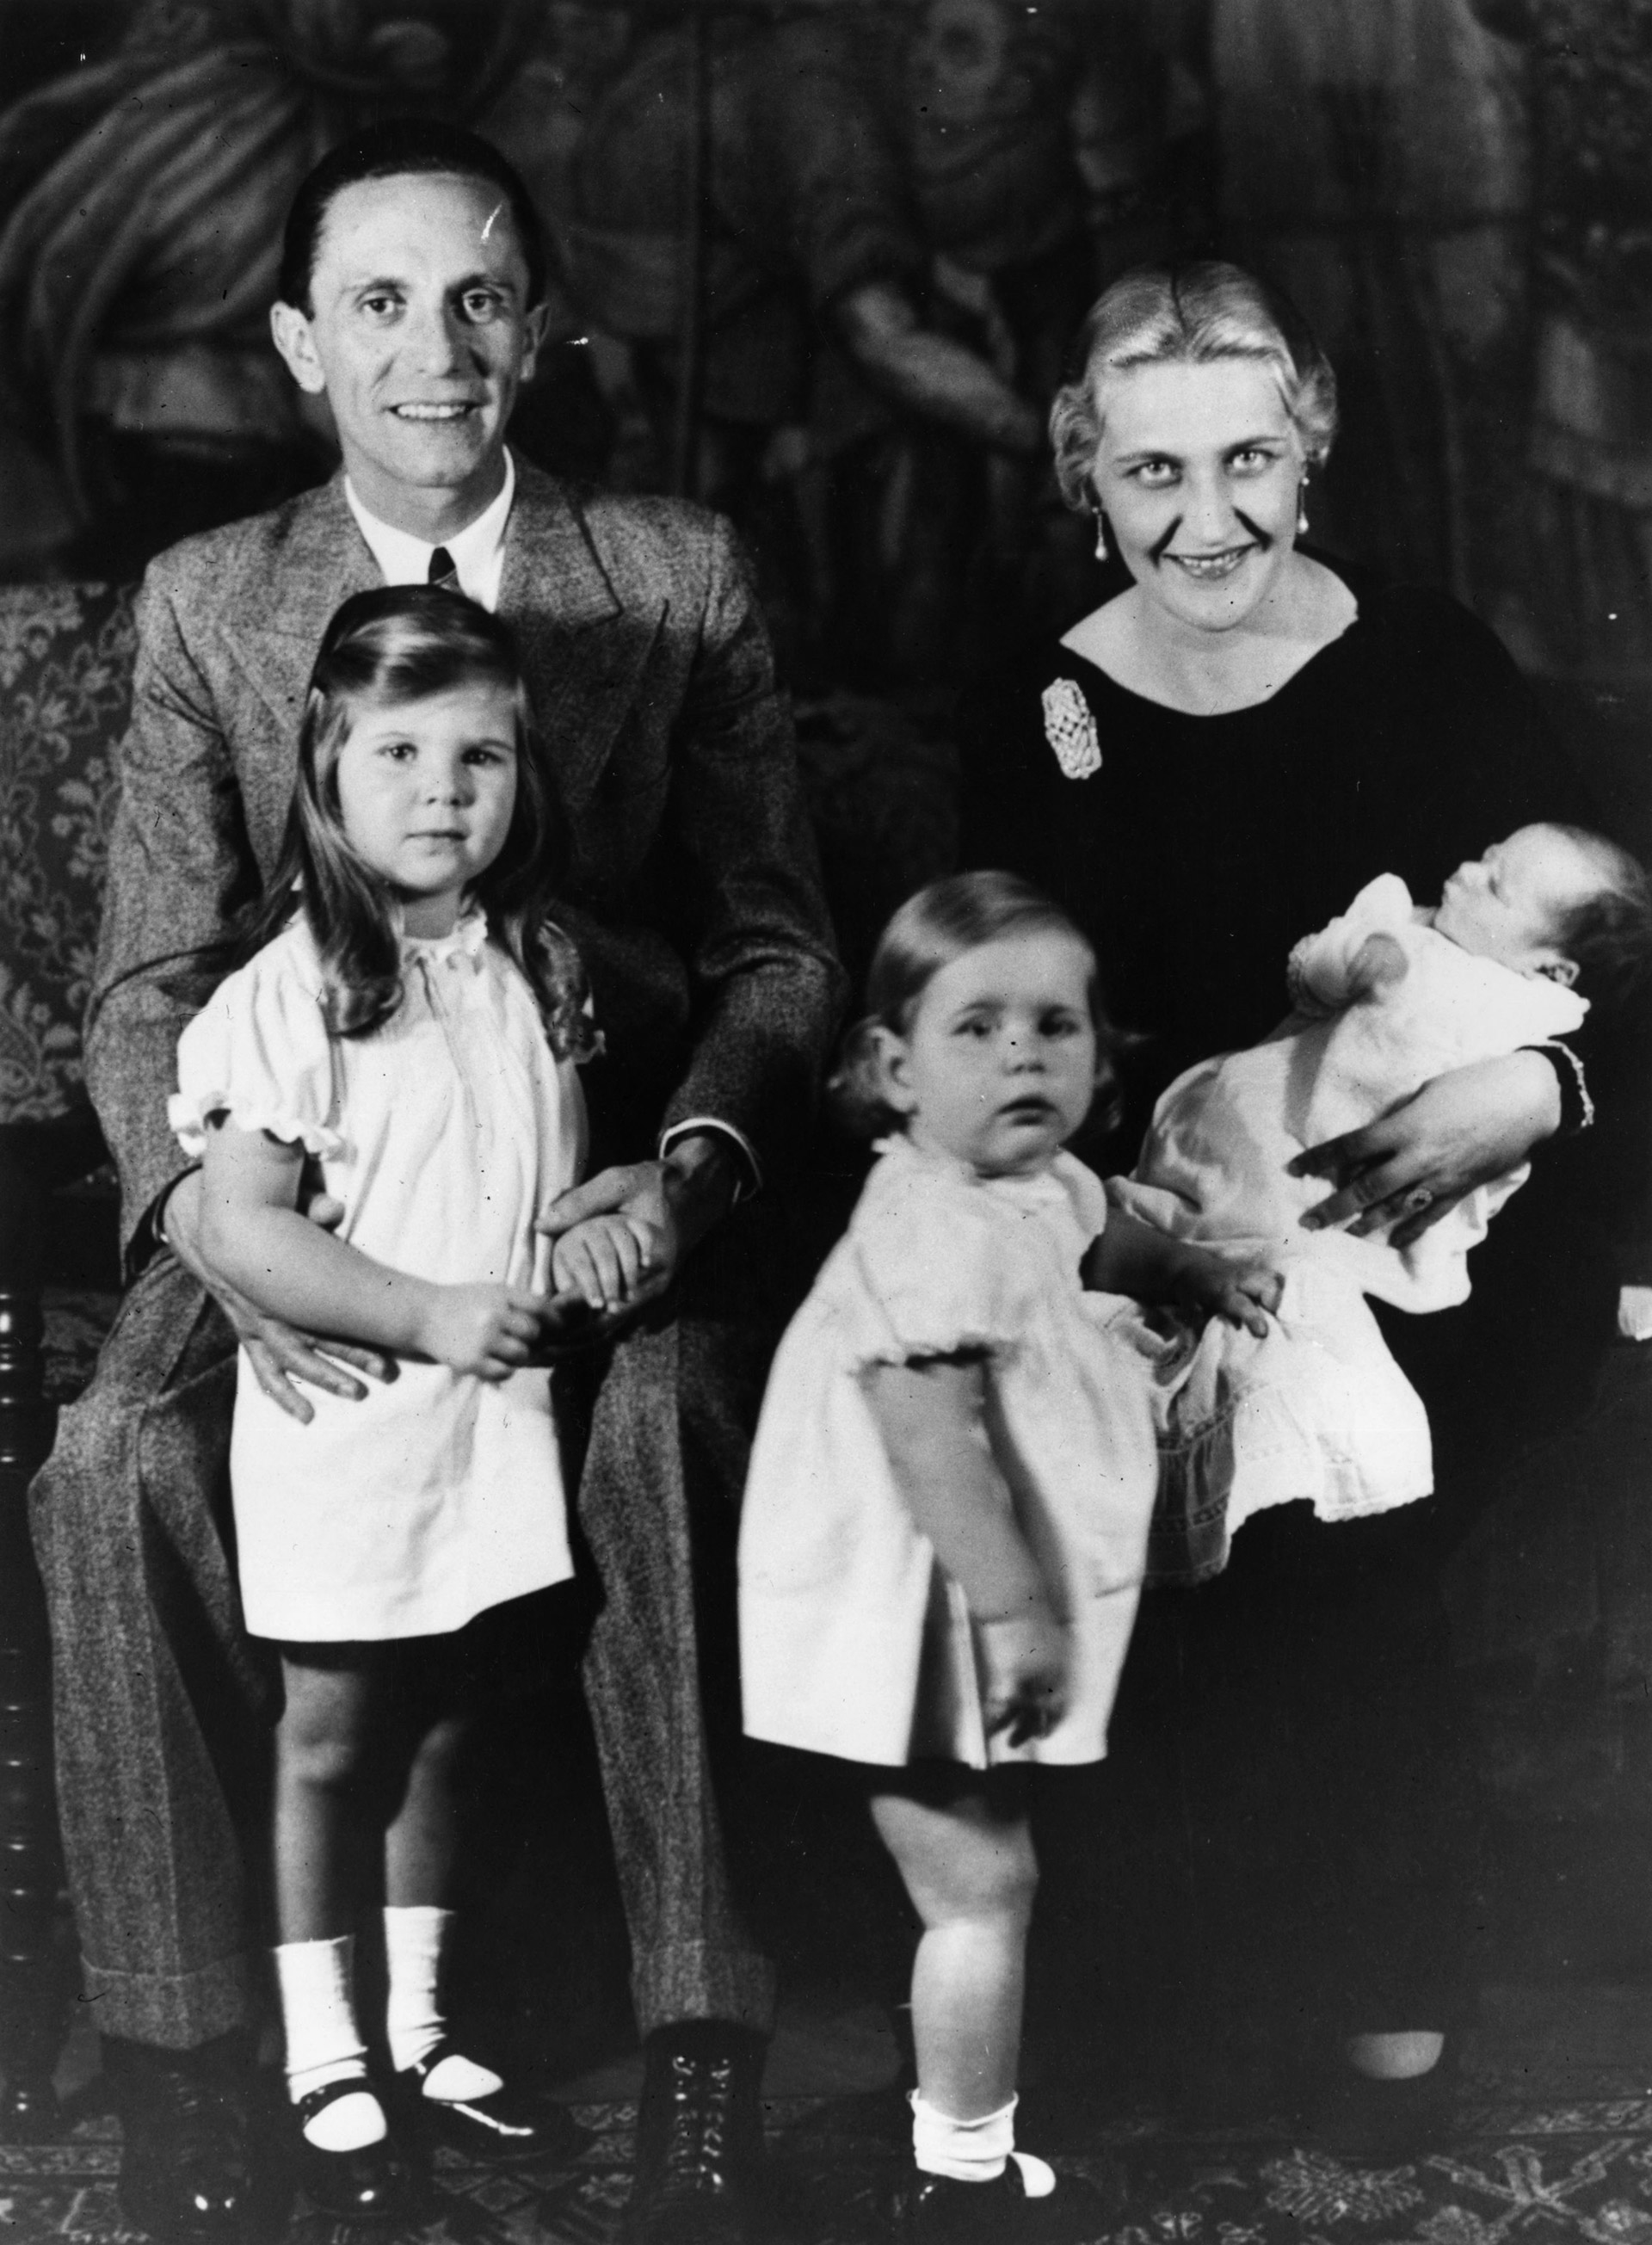 7th November 1935:  German Nazi politician and minister of propaganda Paul Joseph Goebbels (1897 - 1945) with his wife and children.  (Photo by Fox Photos/Getty Images)